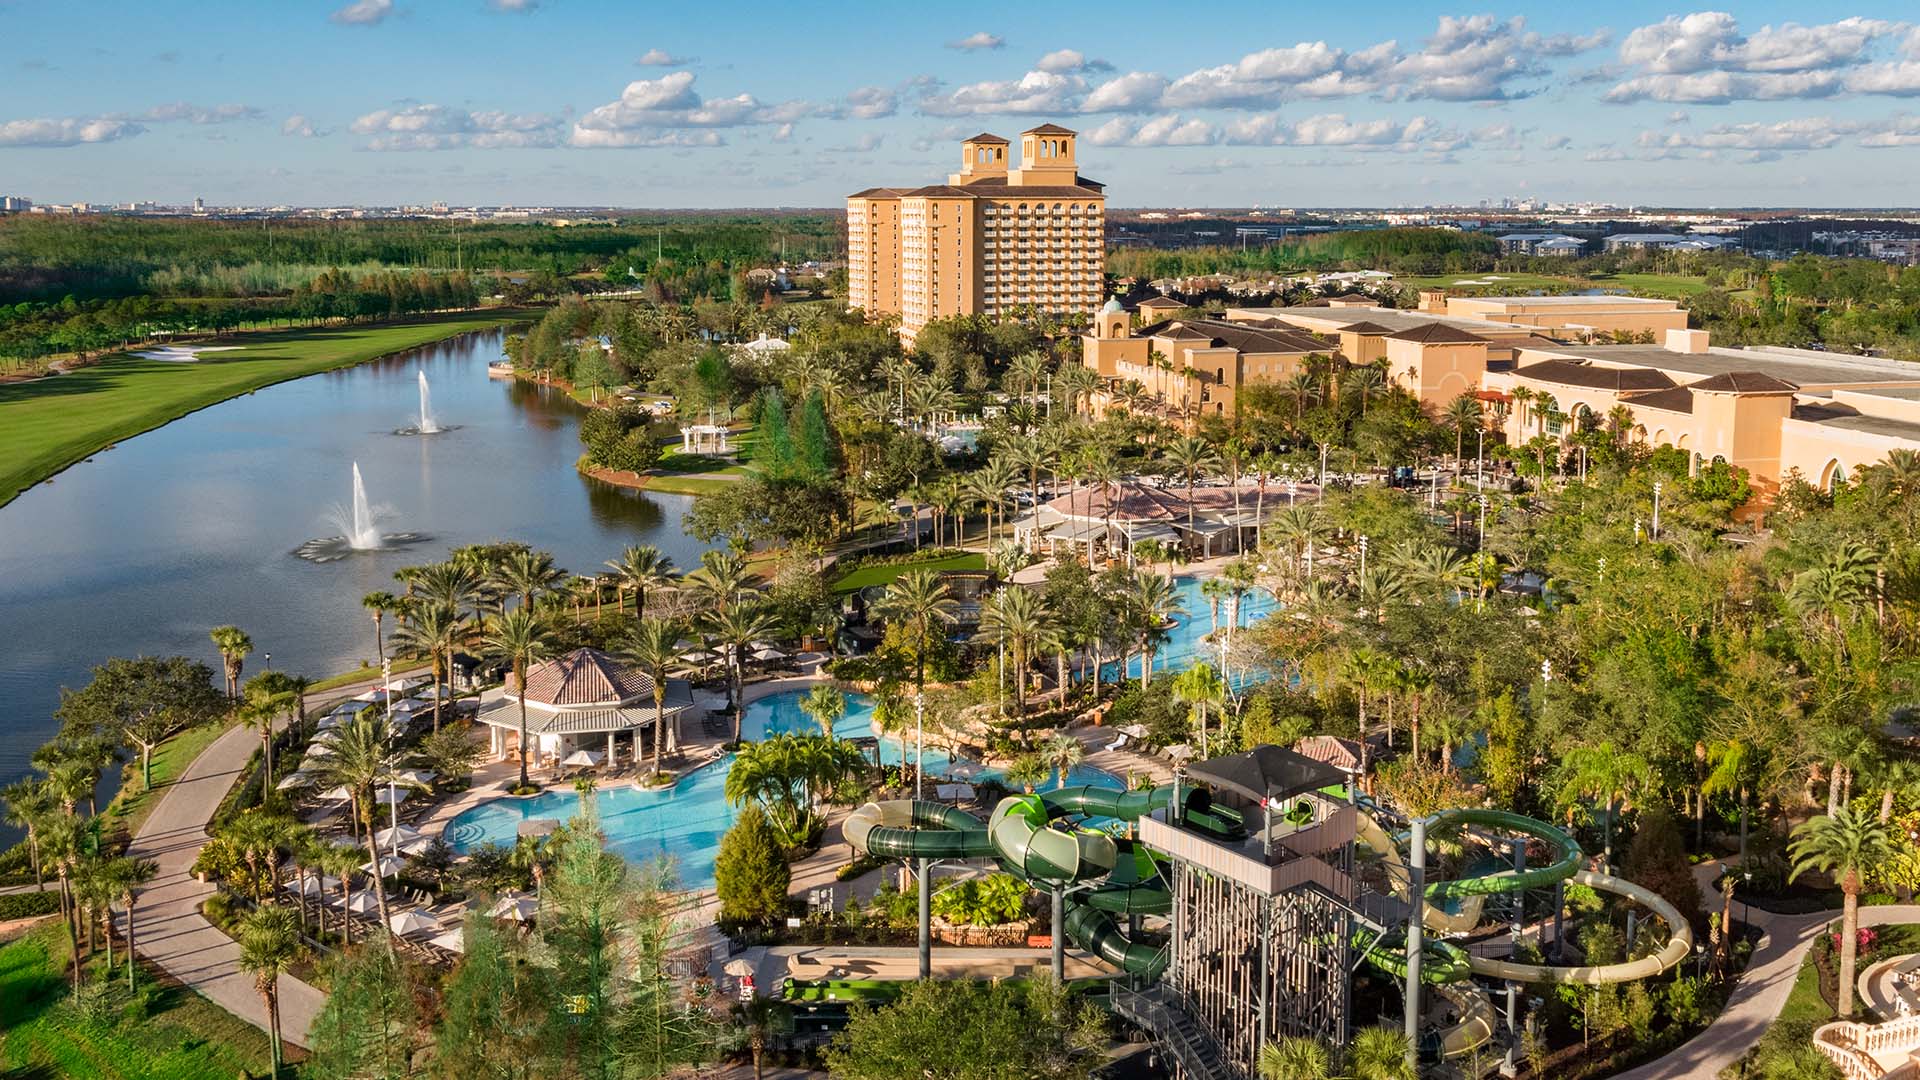 Birds-eye view of JW Marriott Orlando, Grande Lakes featuring many pools, fountains and waterslides